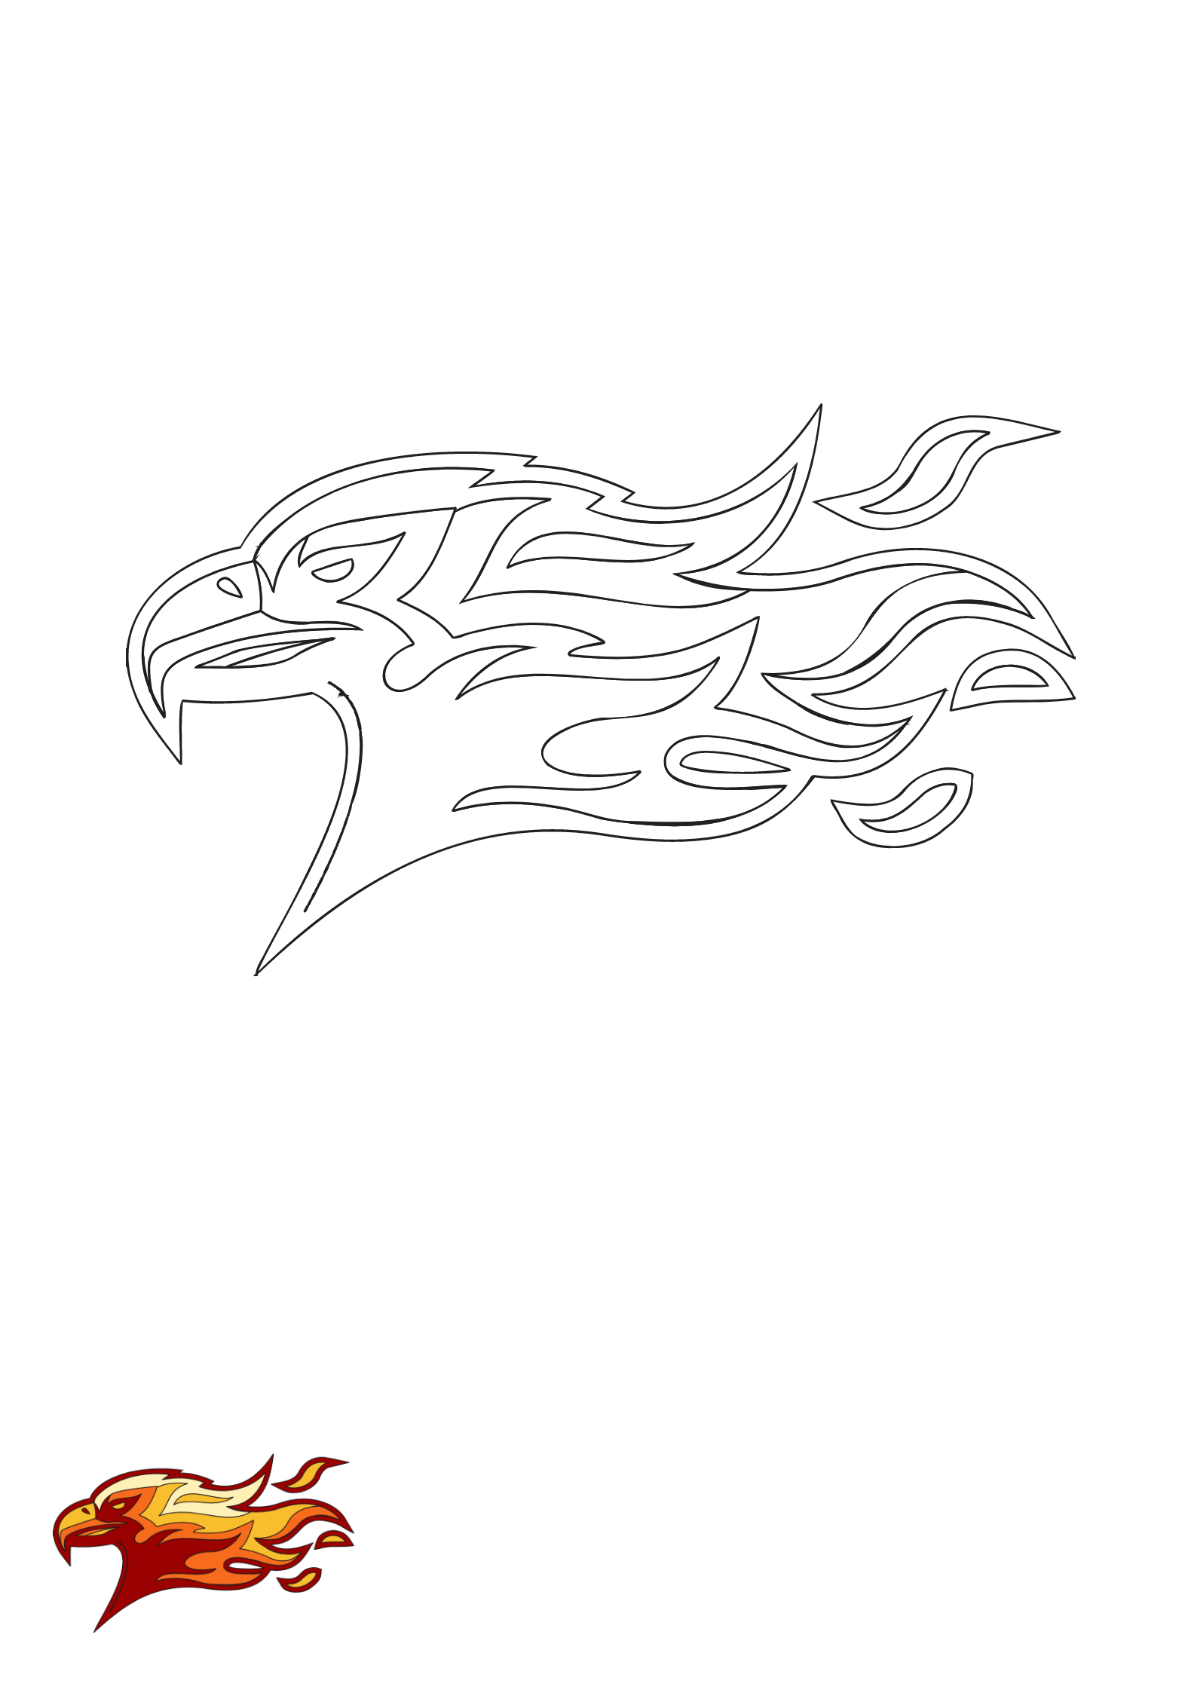 Flame Eagle coloring page Template